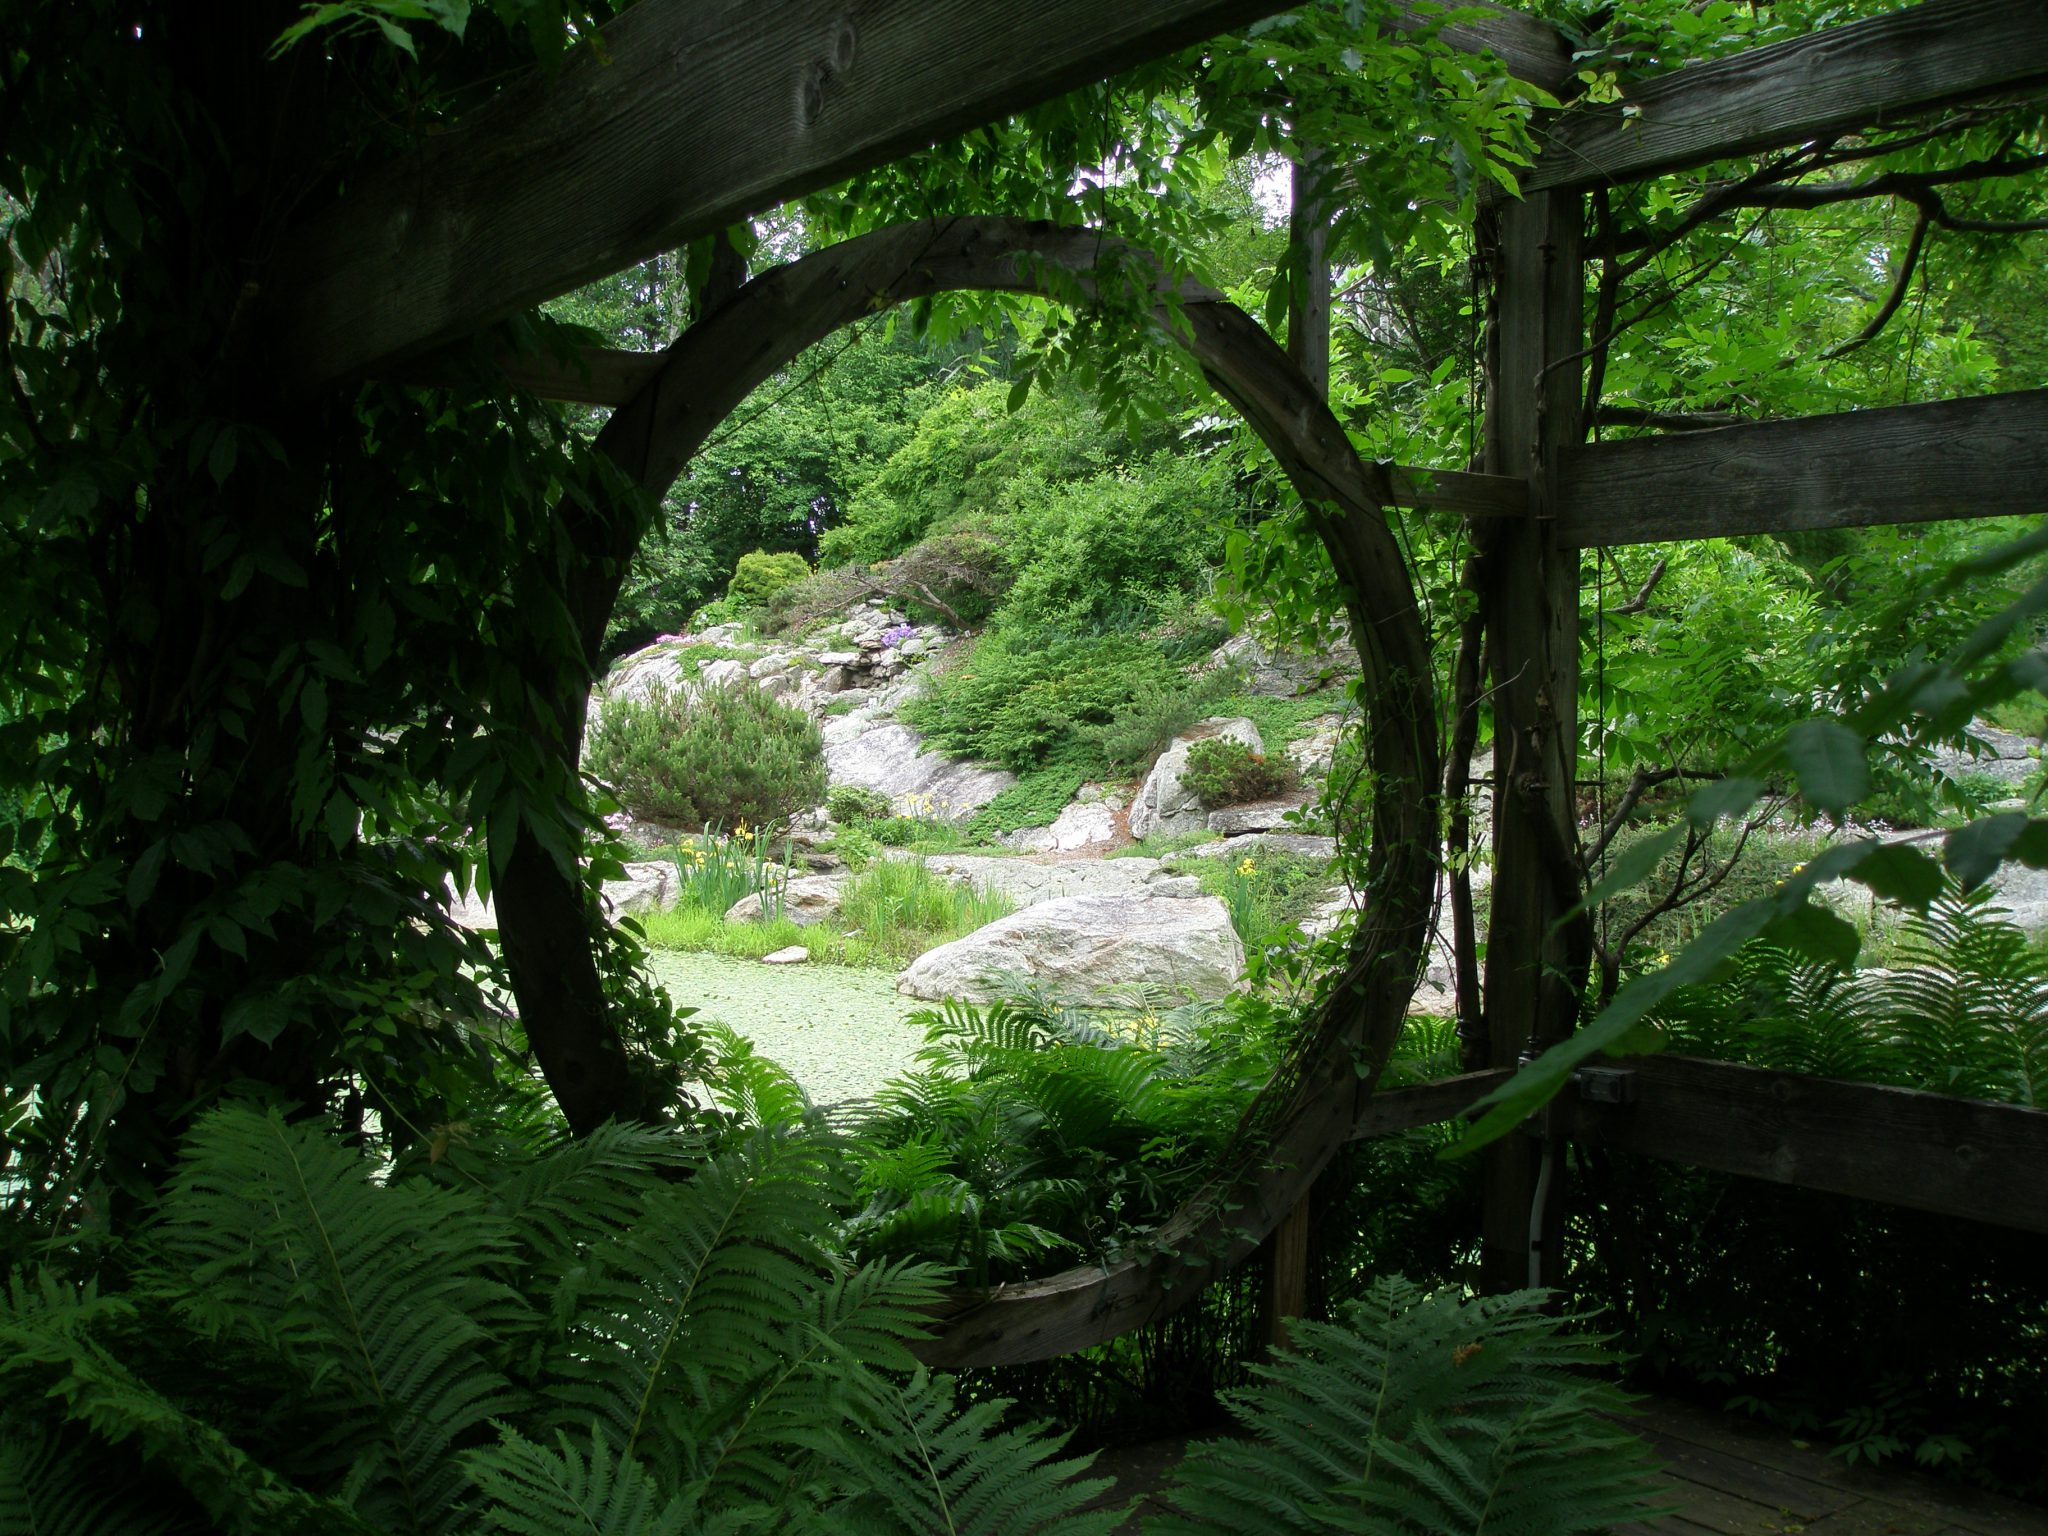 View of the Lake and Rock Ledge Garden, from inside the Wisteria Pavilion.